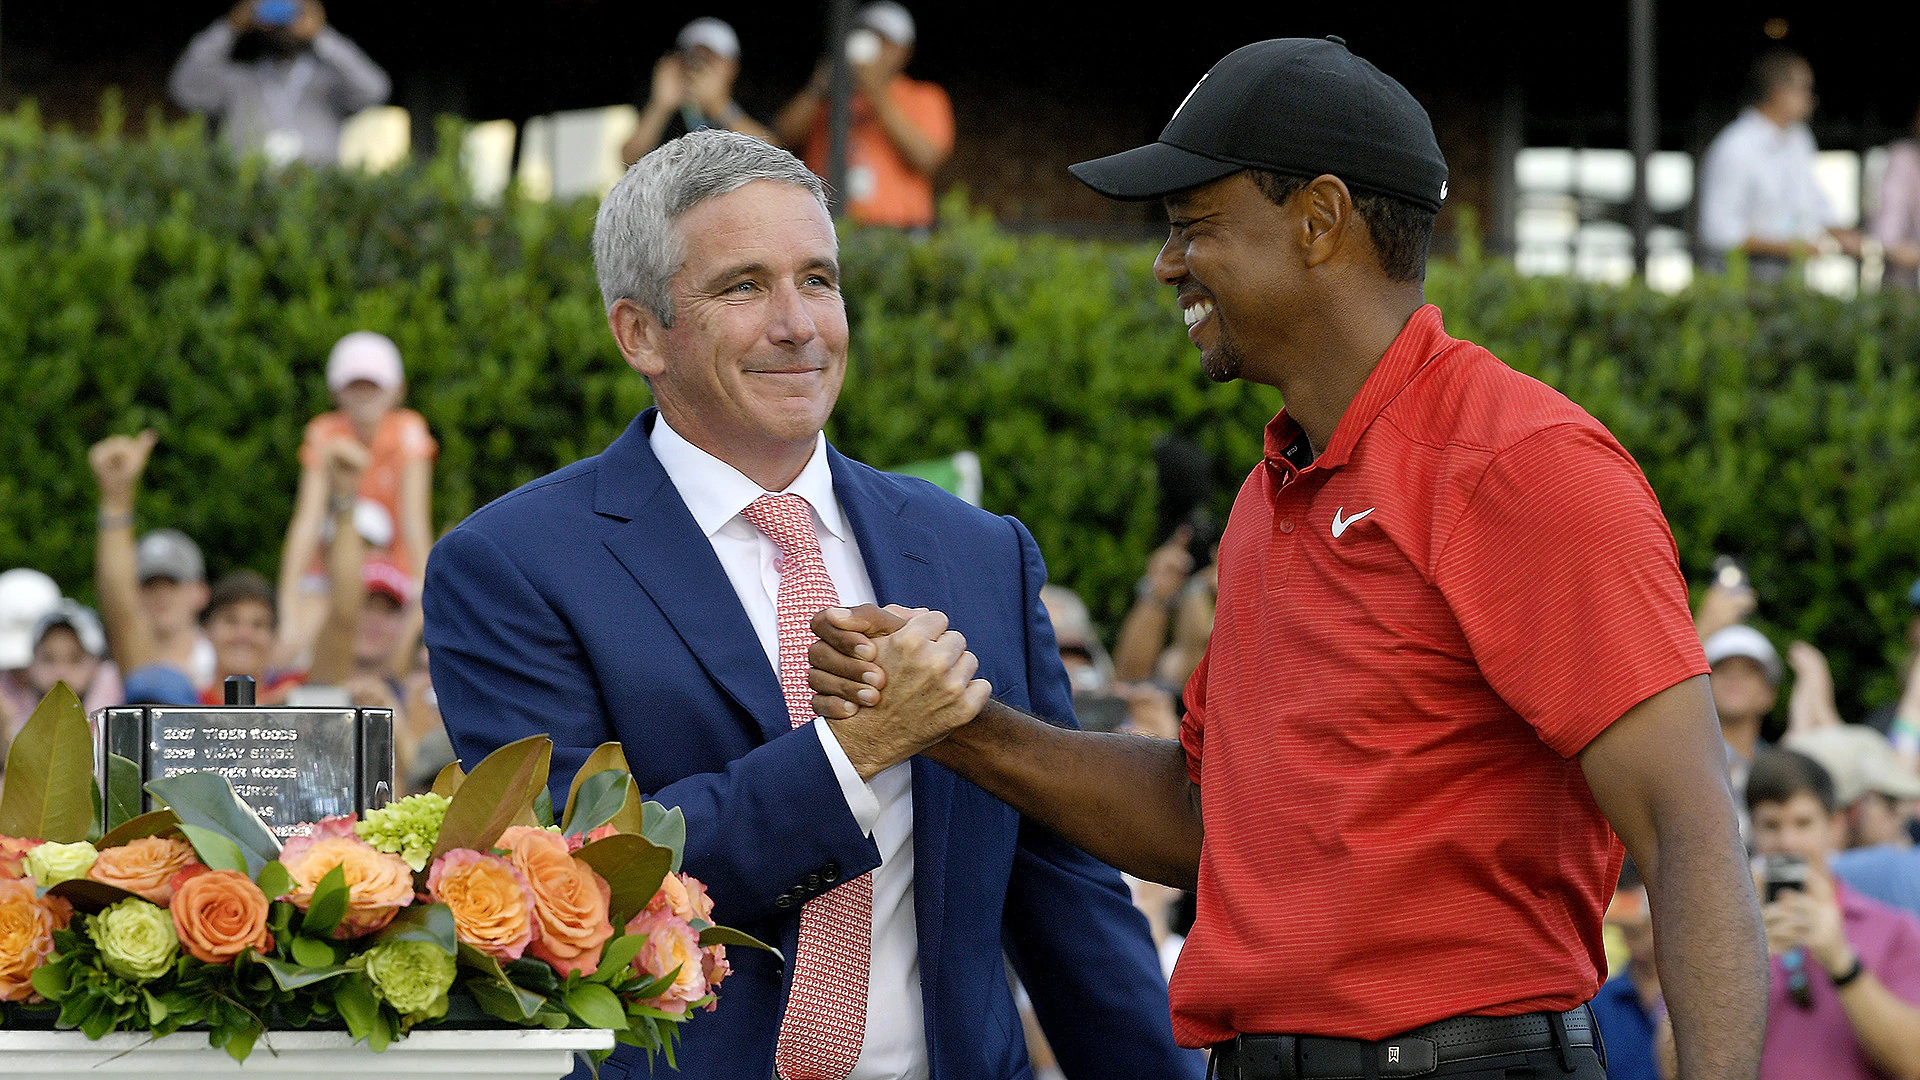 Jay Monahan on Tiger Woods: ‘Only thing that really matters now is his well-being’